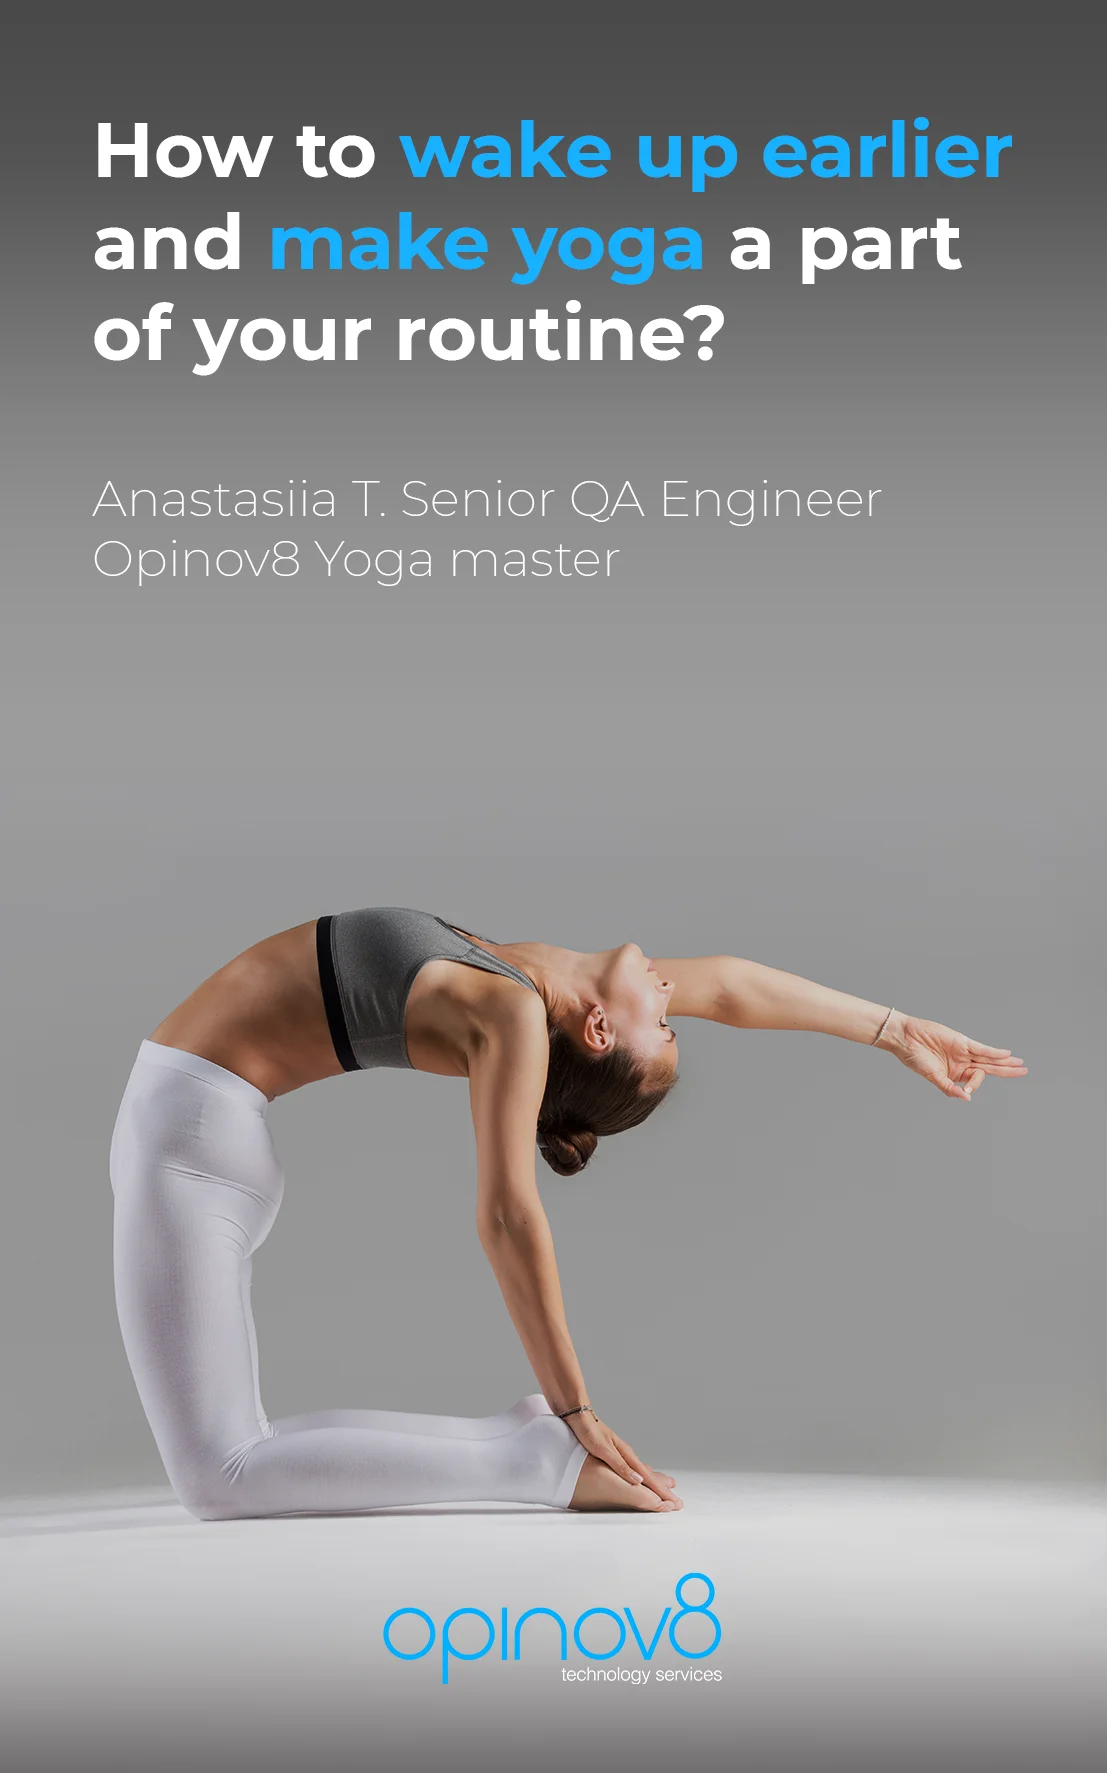 Opinov8 Tips: How to wake up earlier and make yoga a part of your routine